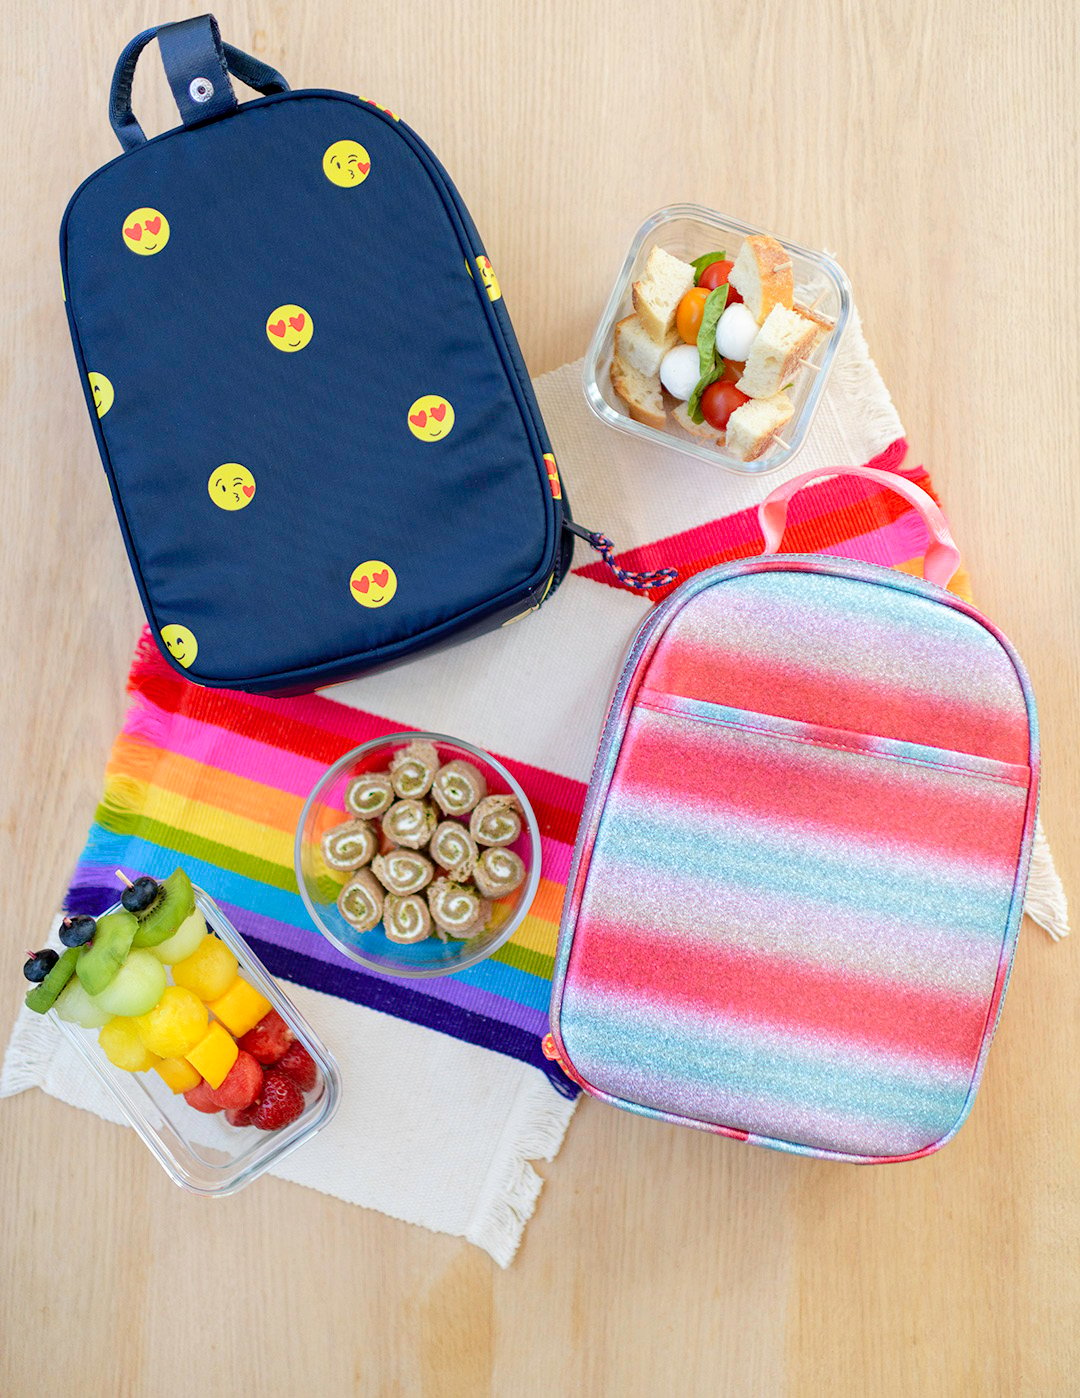 3 Game Changing Back to School Lunch Recipes + the perfect bag to carry them in from Weelicious.com